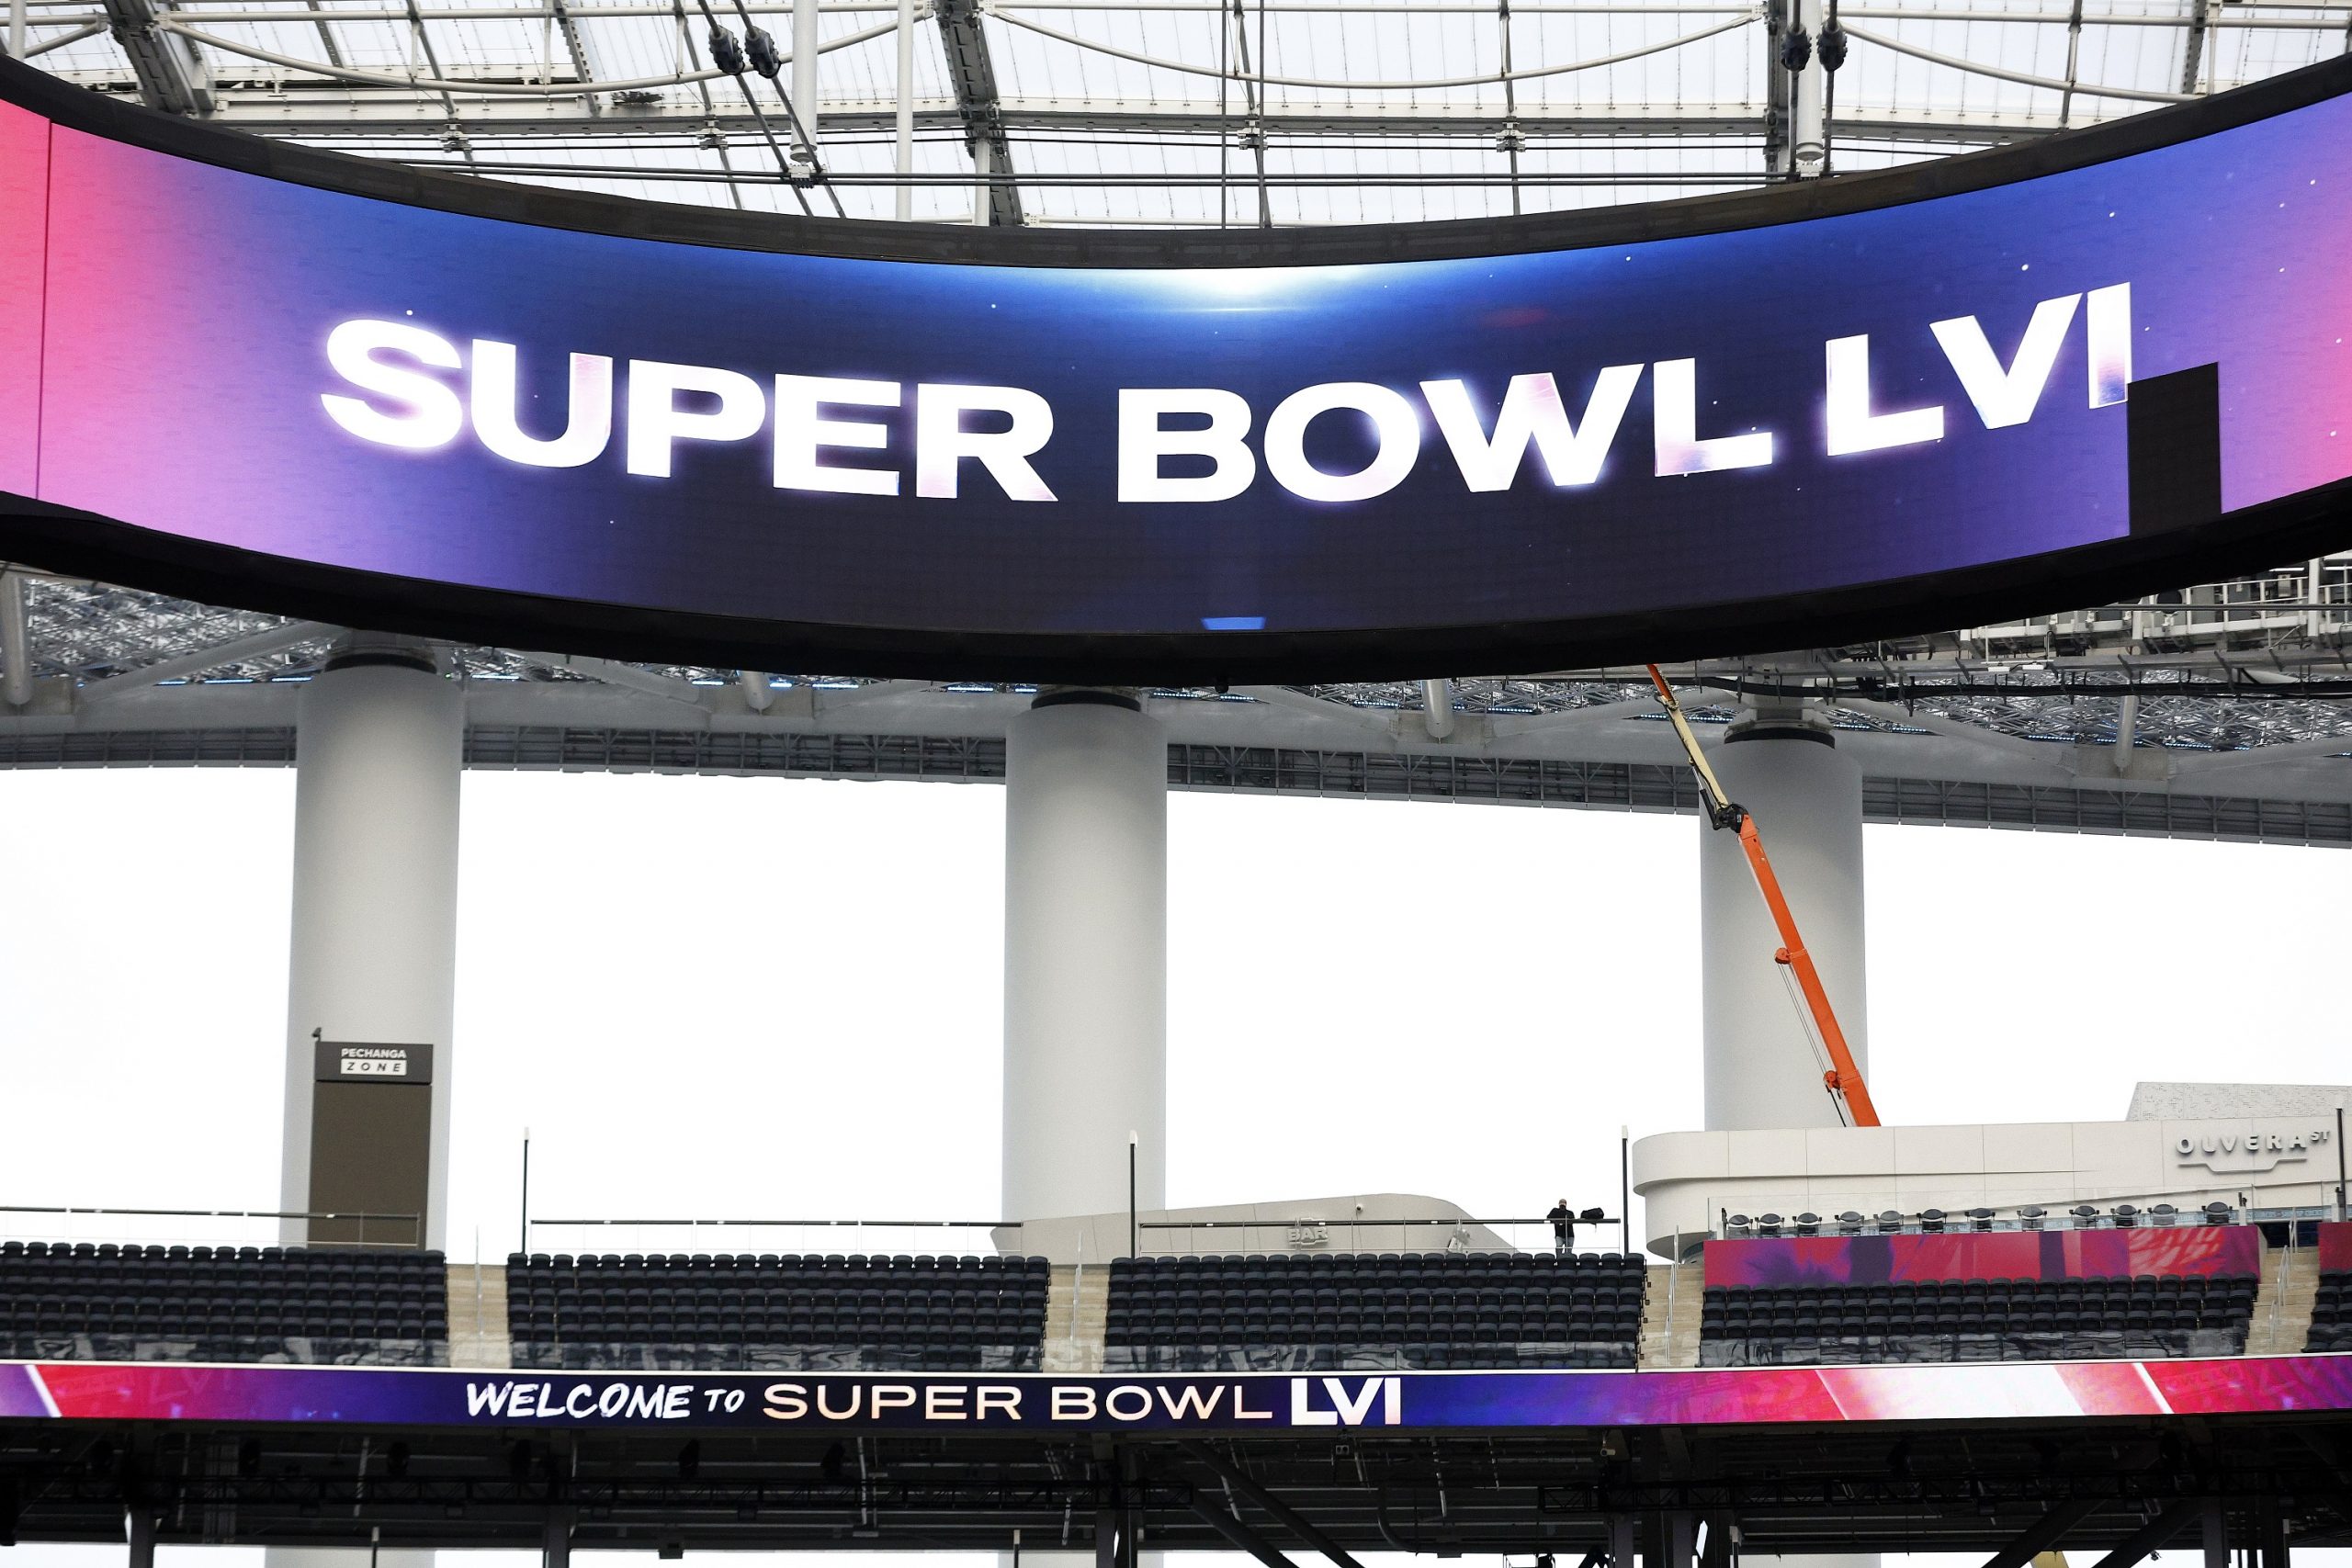 A banner in SoFi Stadium showing the text "Welcome to Super Bowl LVI"